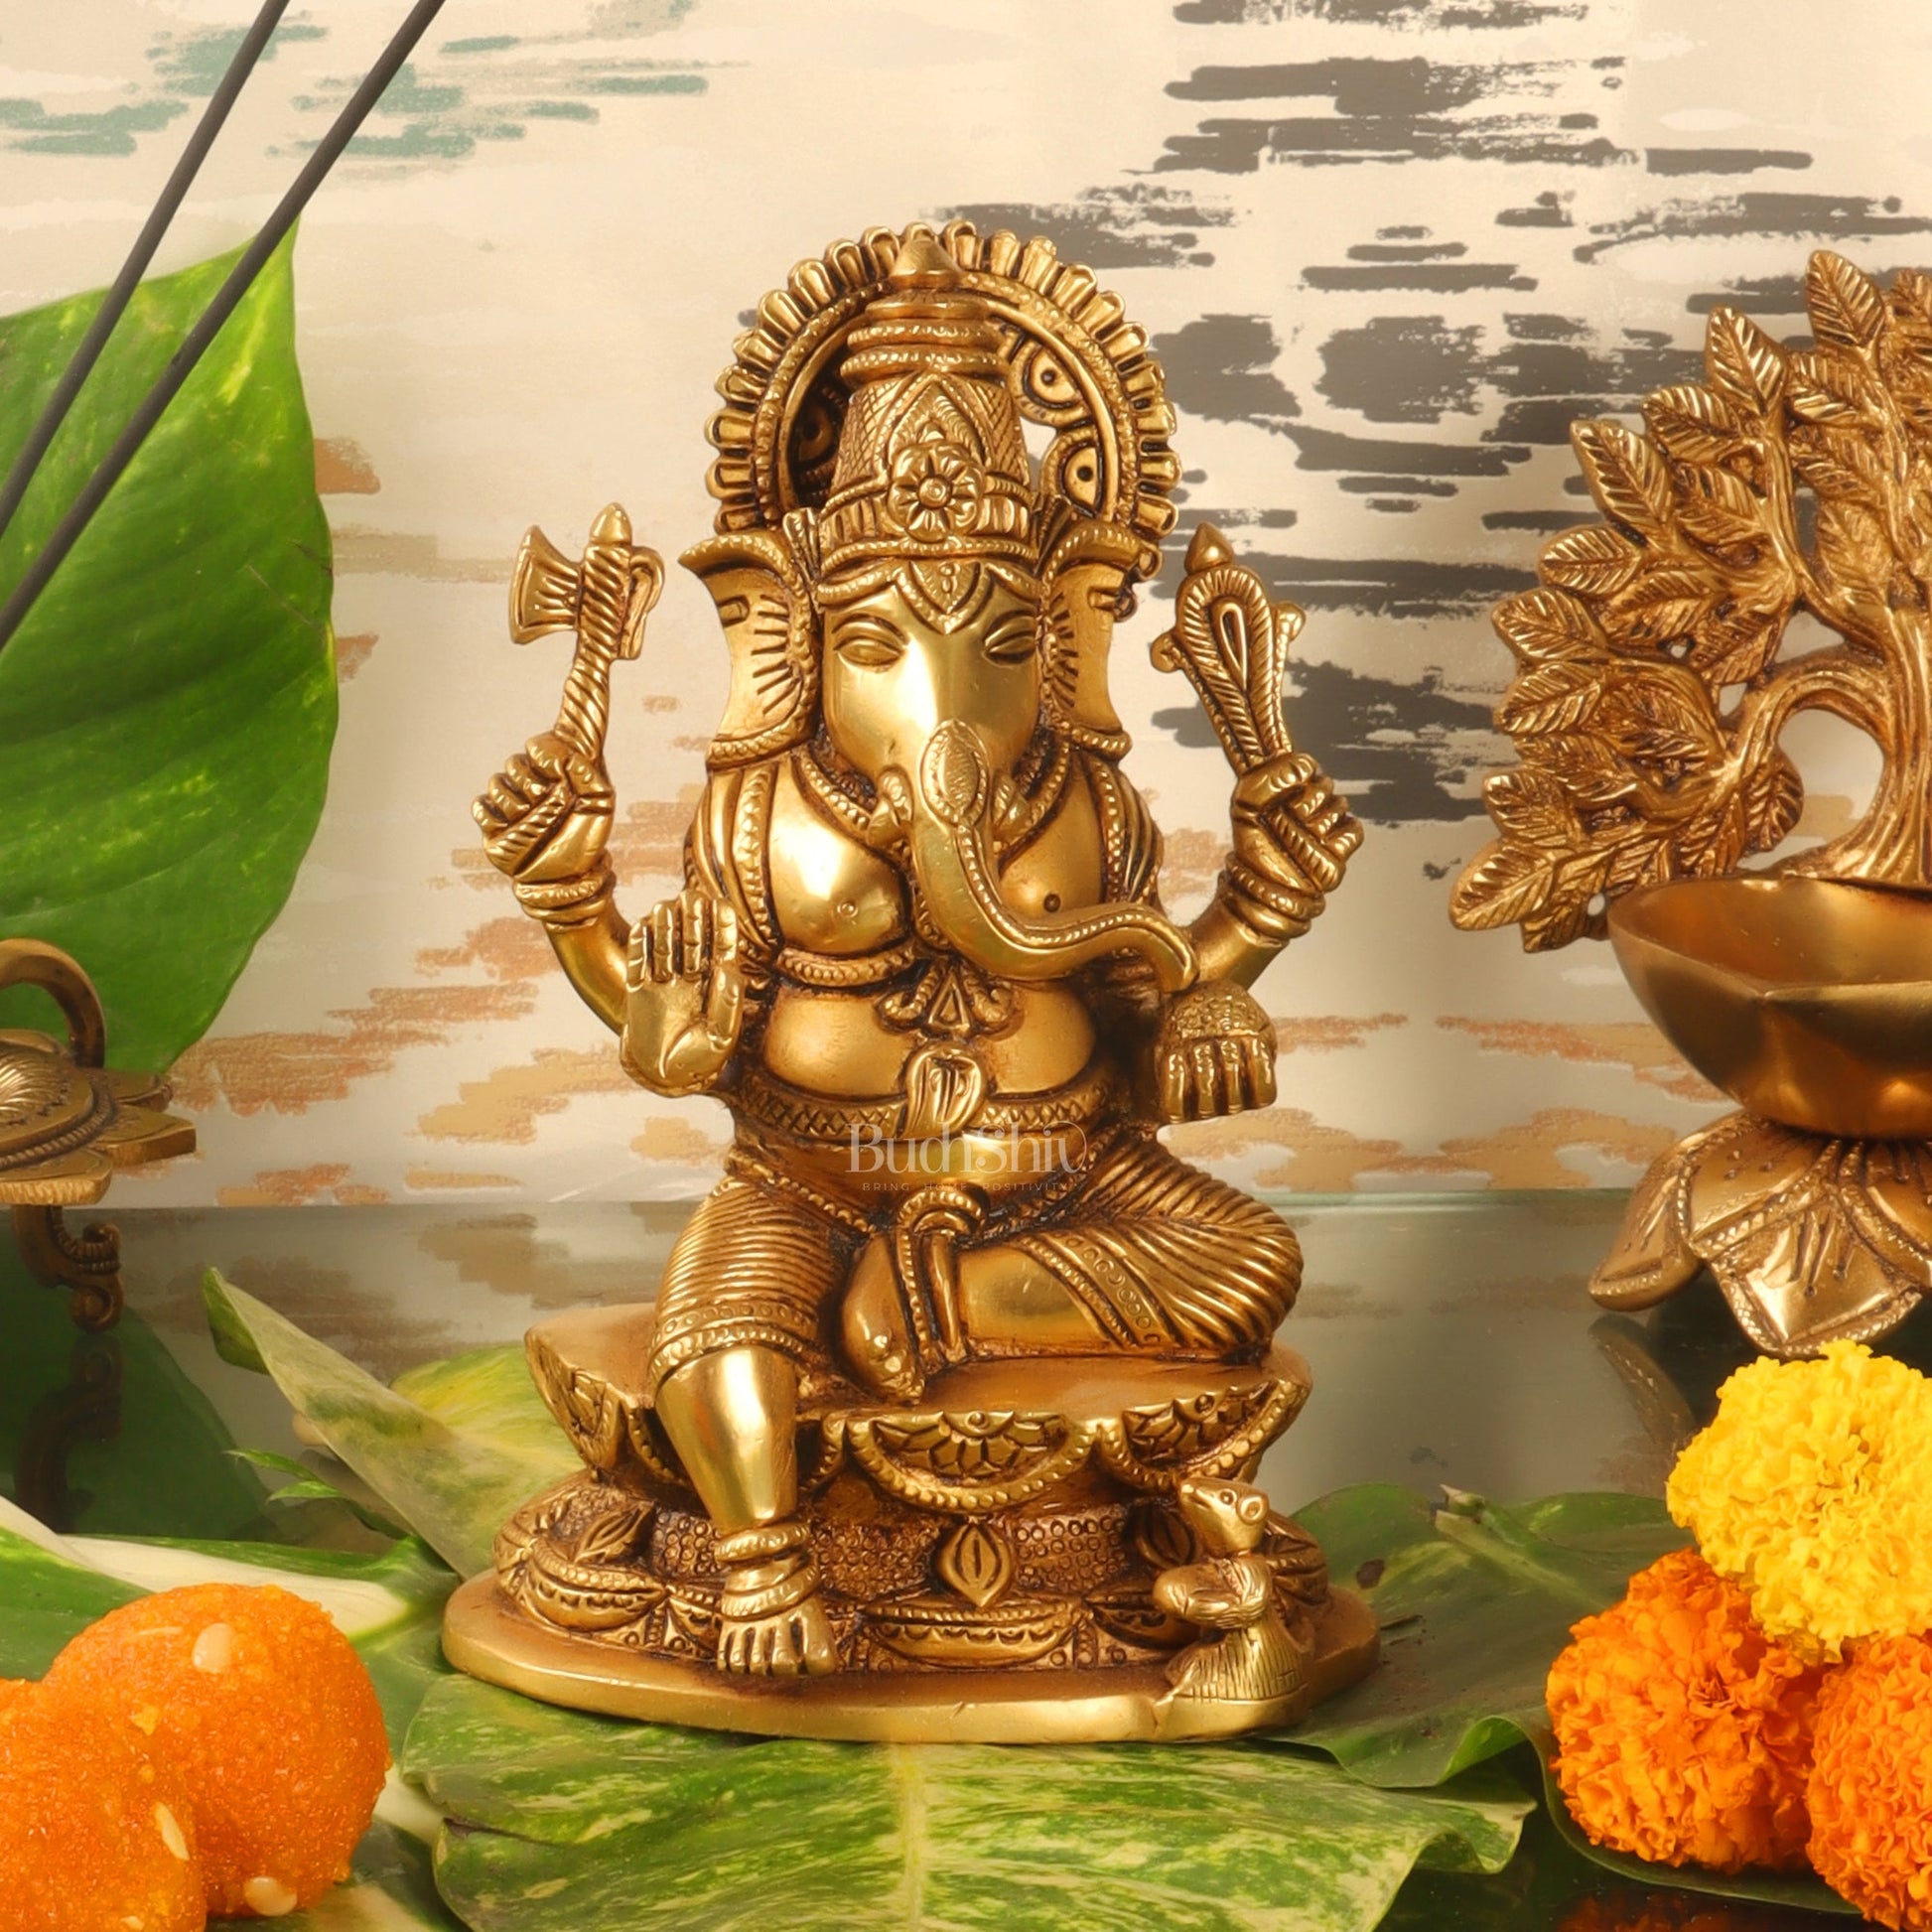 Exquisite Handcrafted Brass Ganesha Statue | Height 7 inches - Budhshiv.com